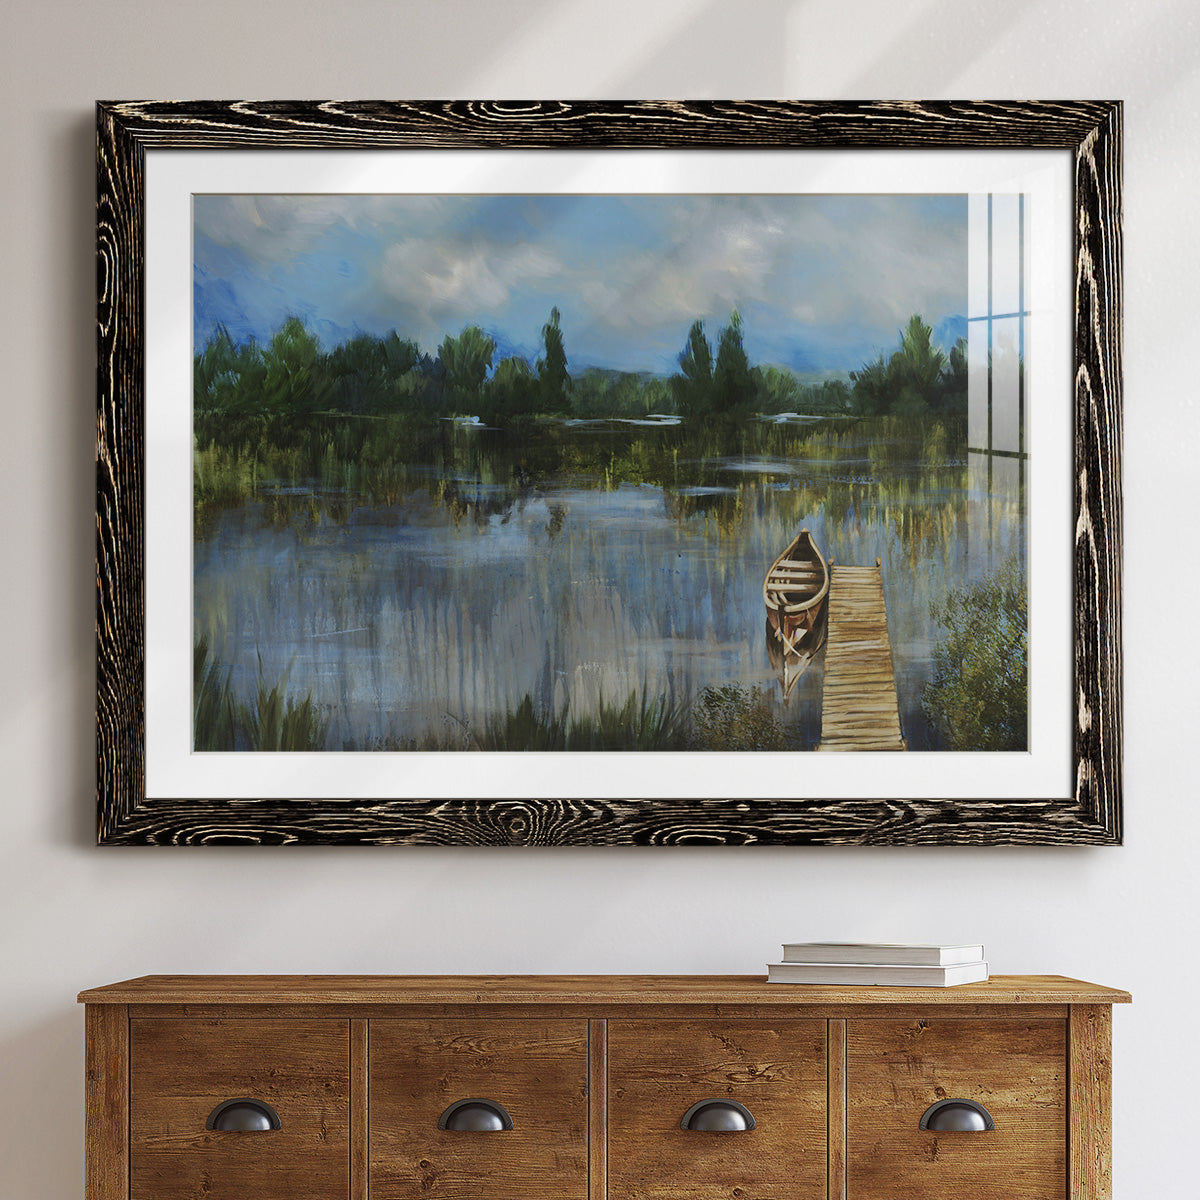 A Quiet Place-Premium Framed Print - Ready to Hang